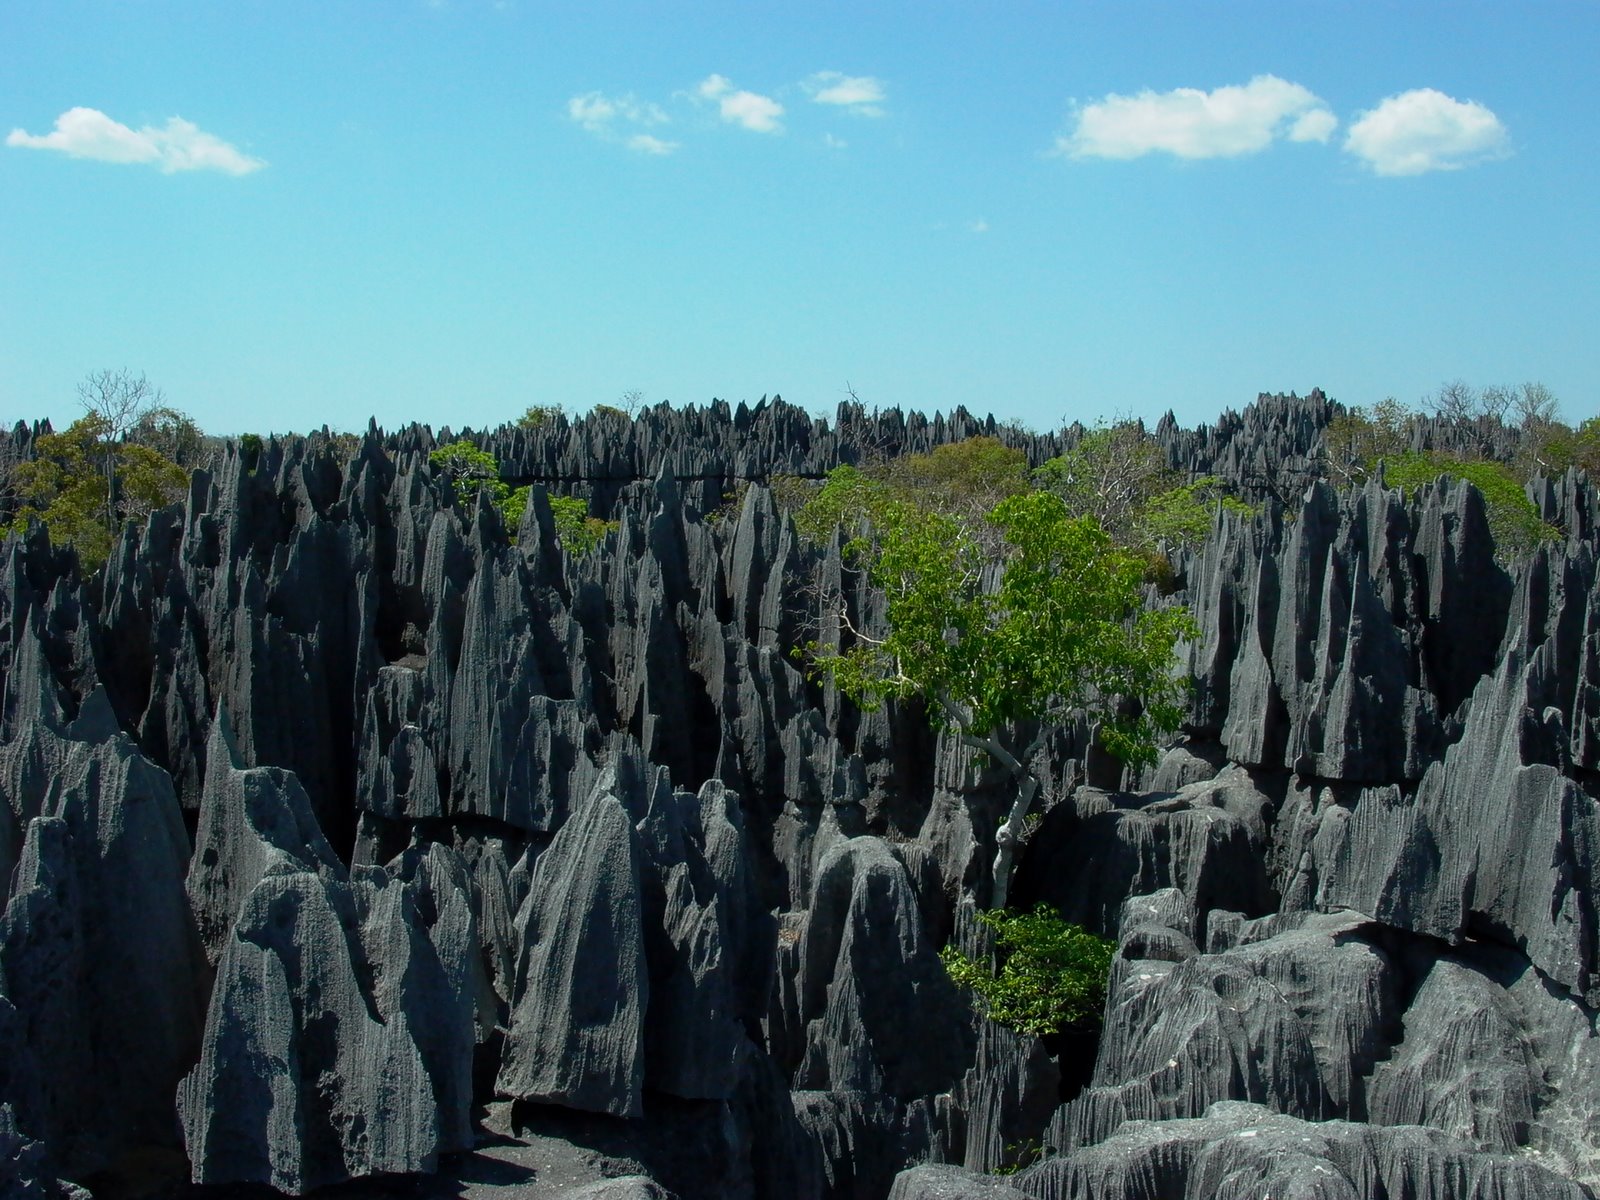 View of The Grand Tsingy of Bamara in Madagascar. 2004 